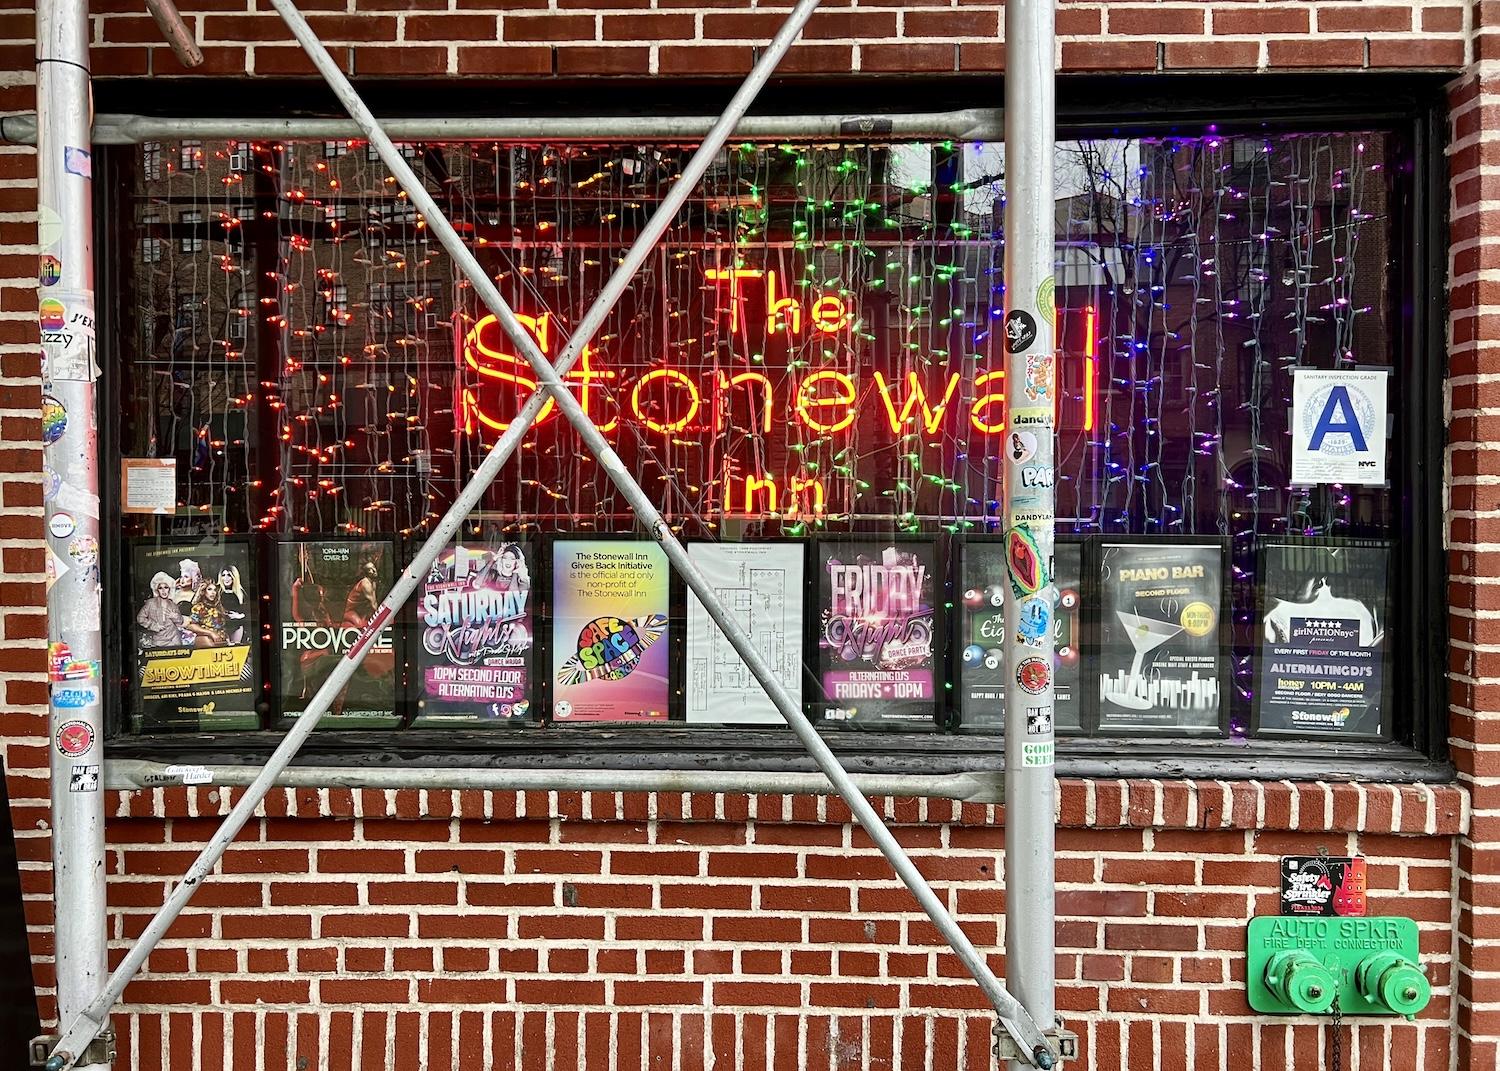 The Stonewall Inn is a privately operated bar at 53 Christopher St. across from Stonewall National Monument.